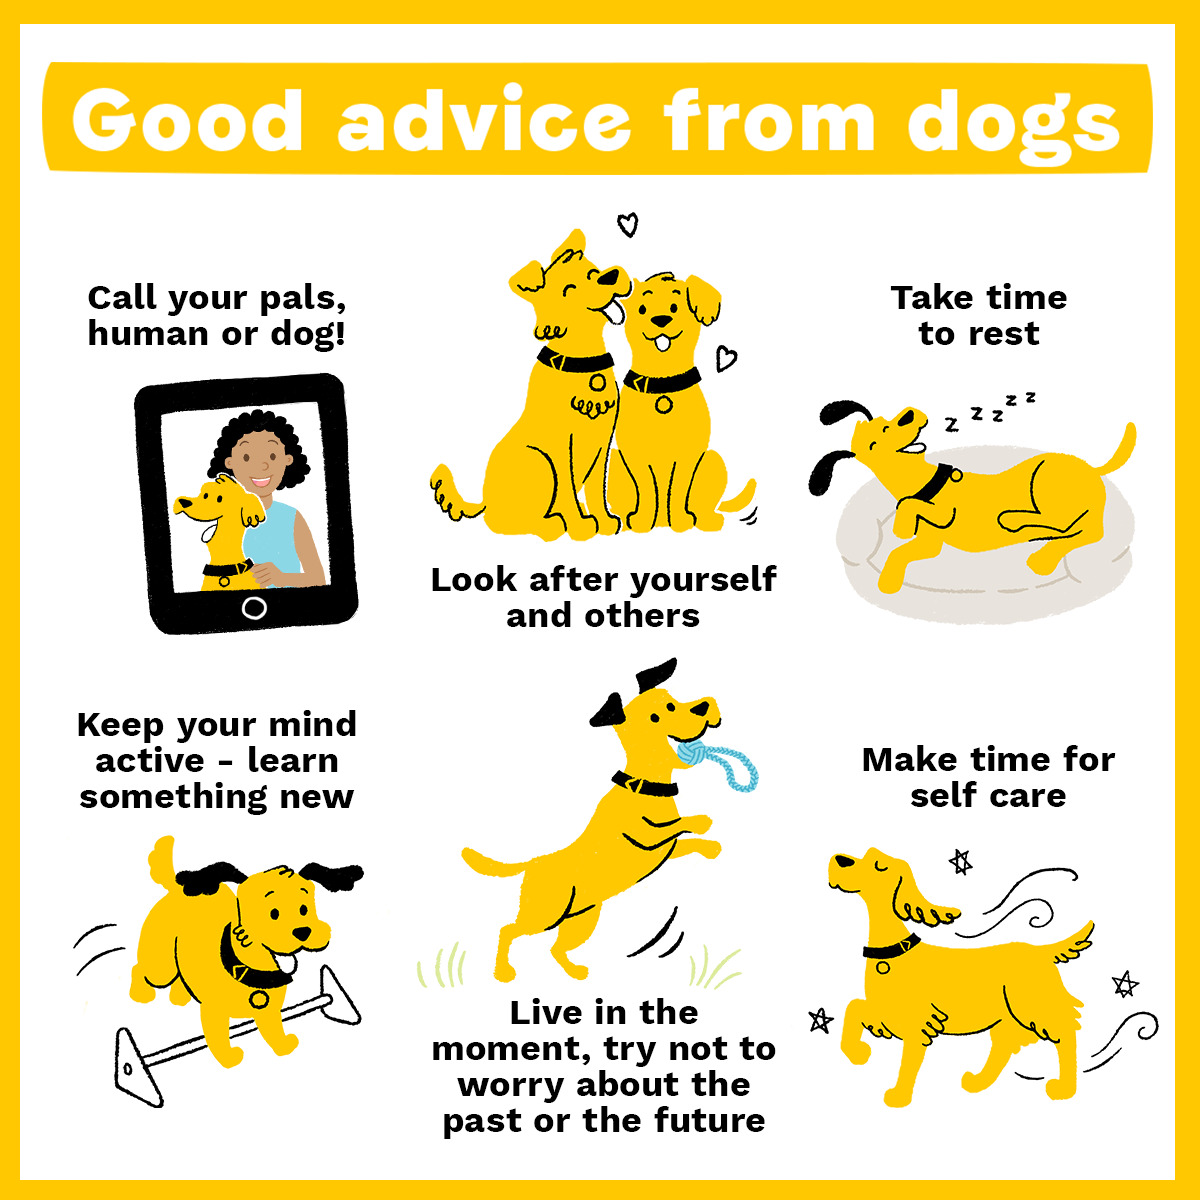 Our dogs have some advice for humans this #MentalHealthAwarenessMonth 🐶 We're making it our challenge this month to be mindful of doing these simple things to improve our wellbeing 💛 Who wants to join us?